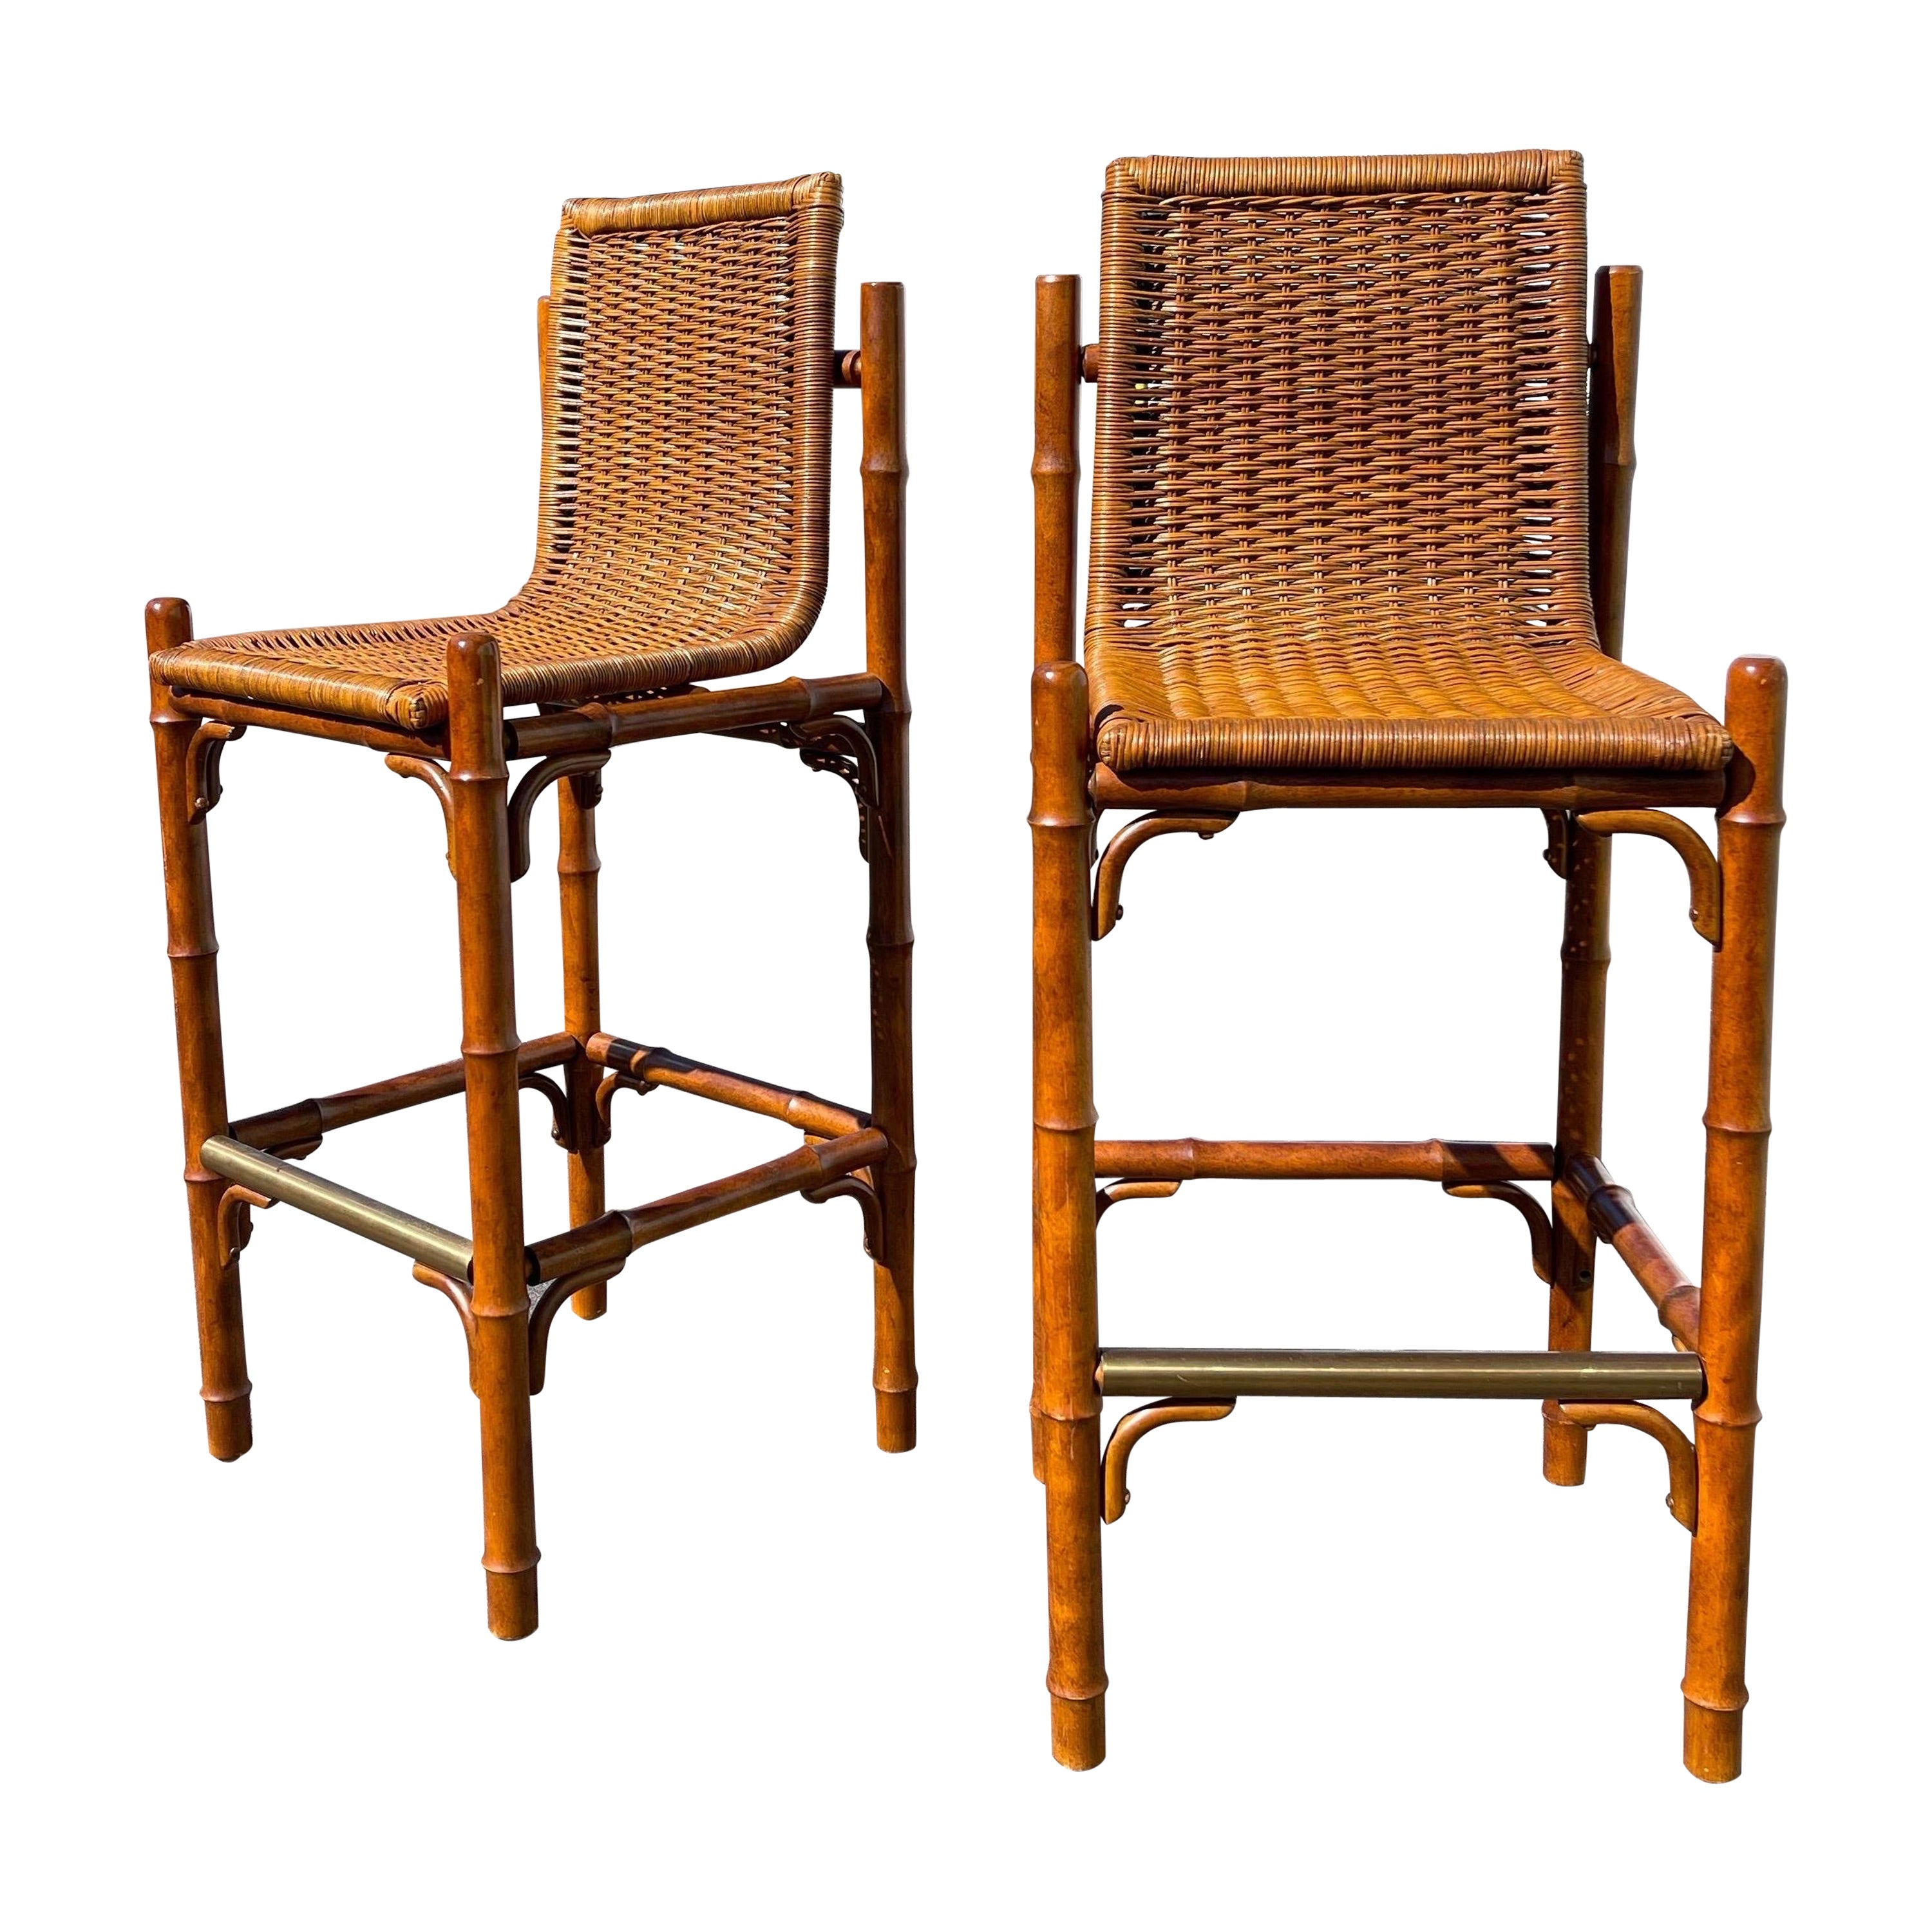 Mid-Century Faux Bamboo Wicker Barstools, a Pair For Sale